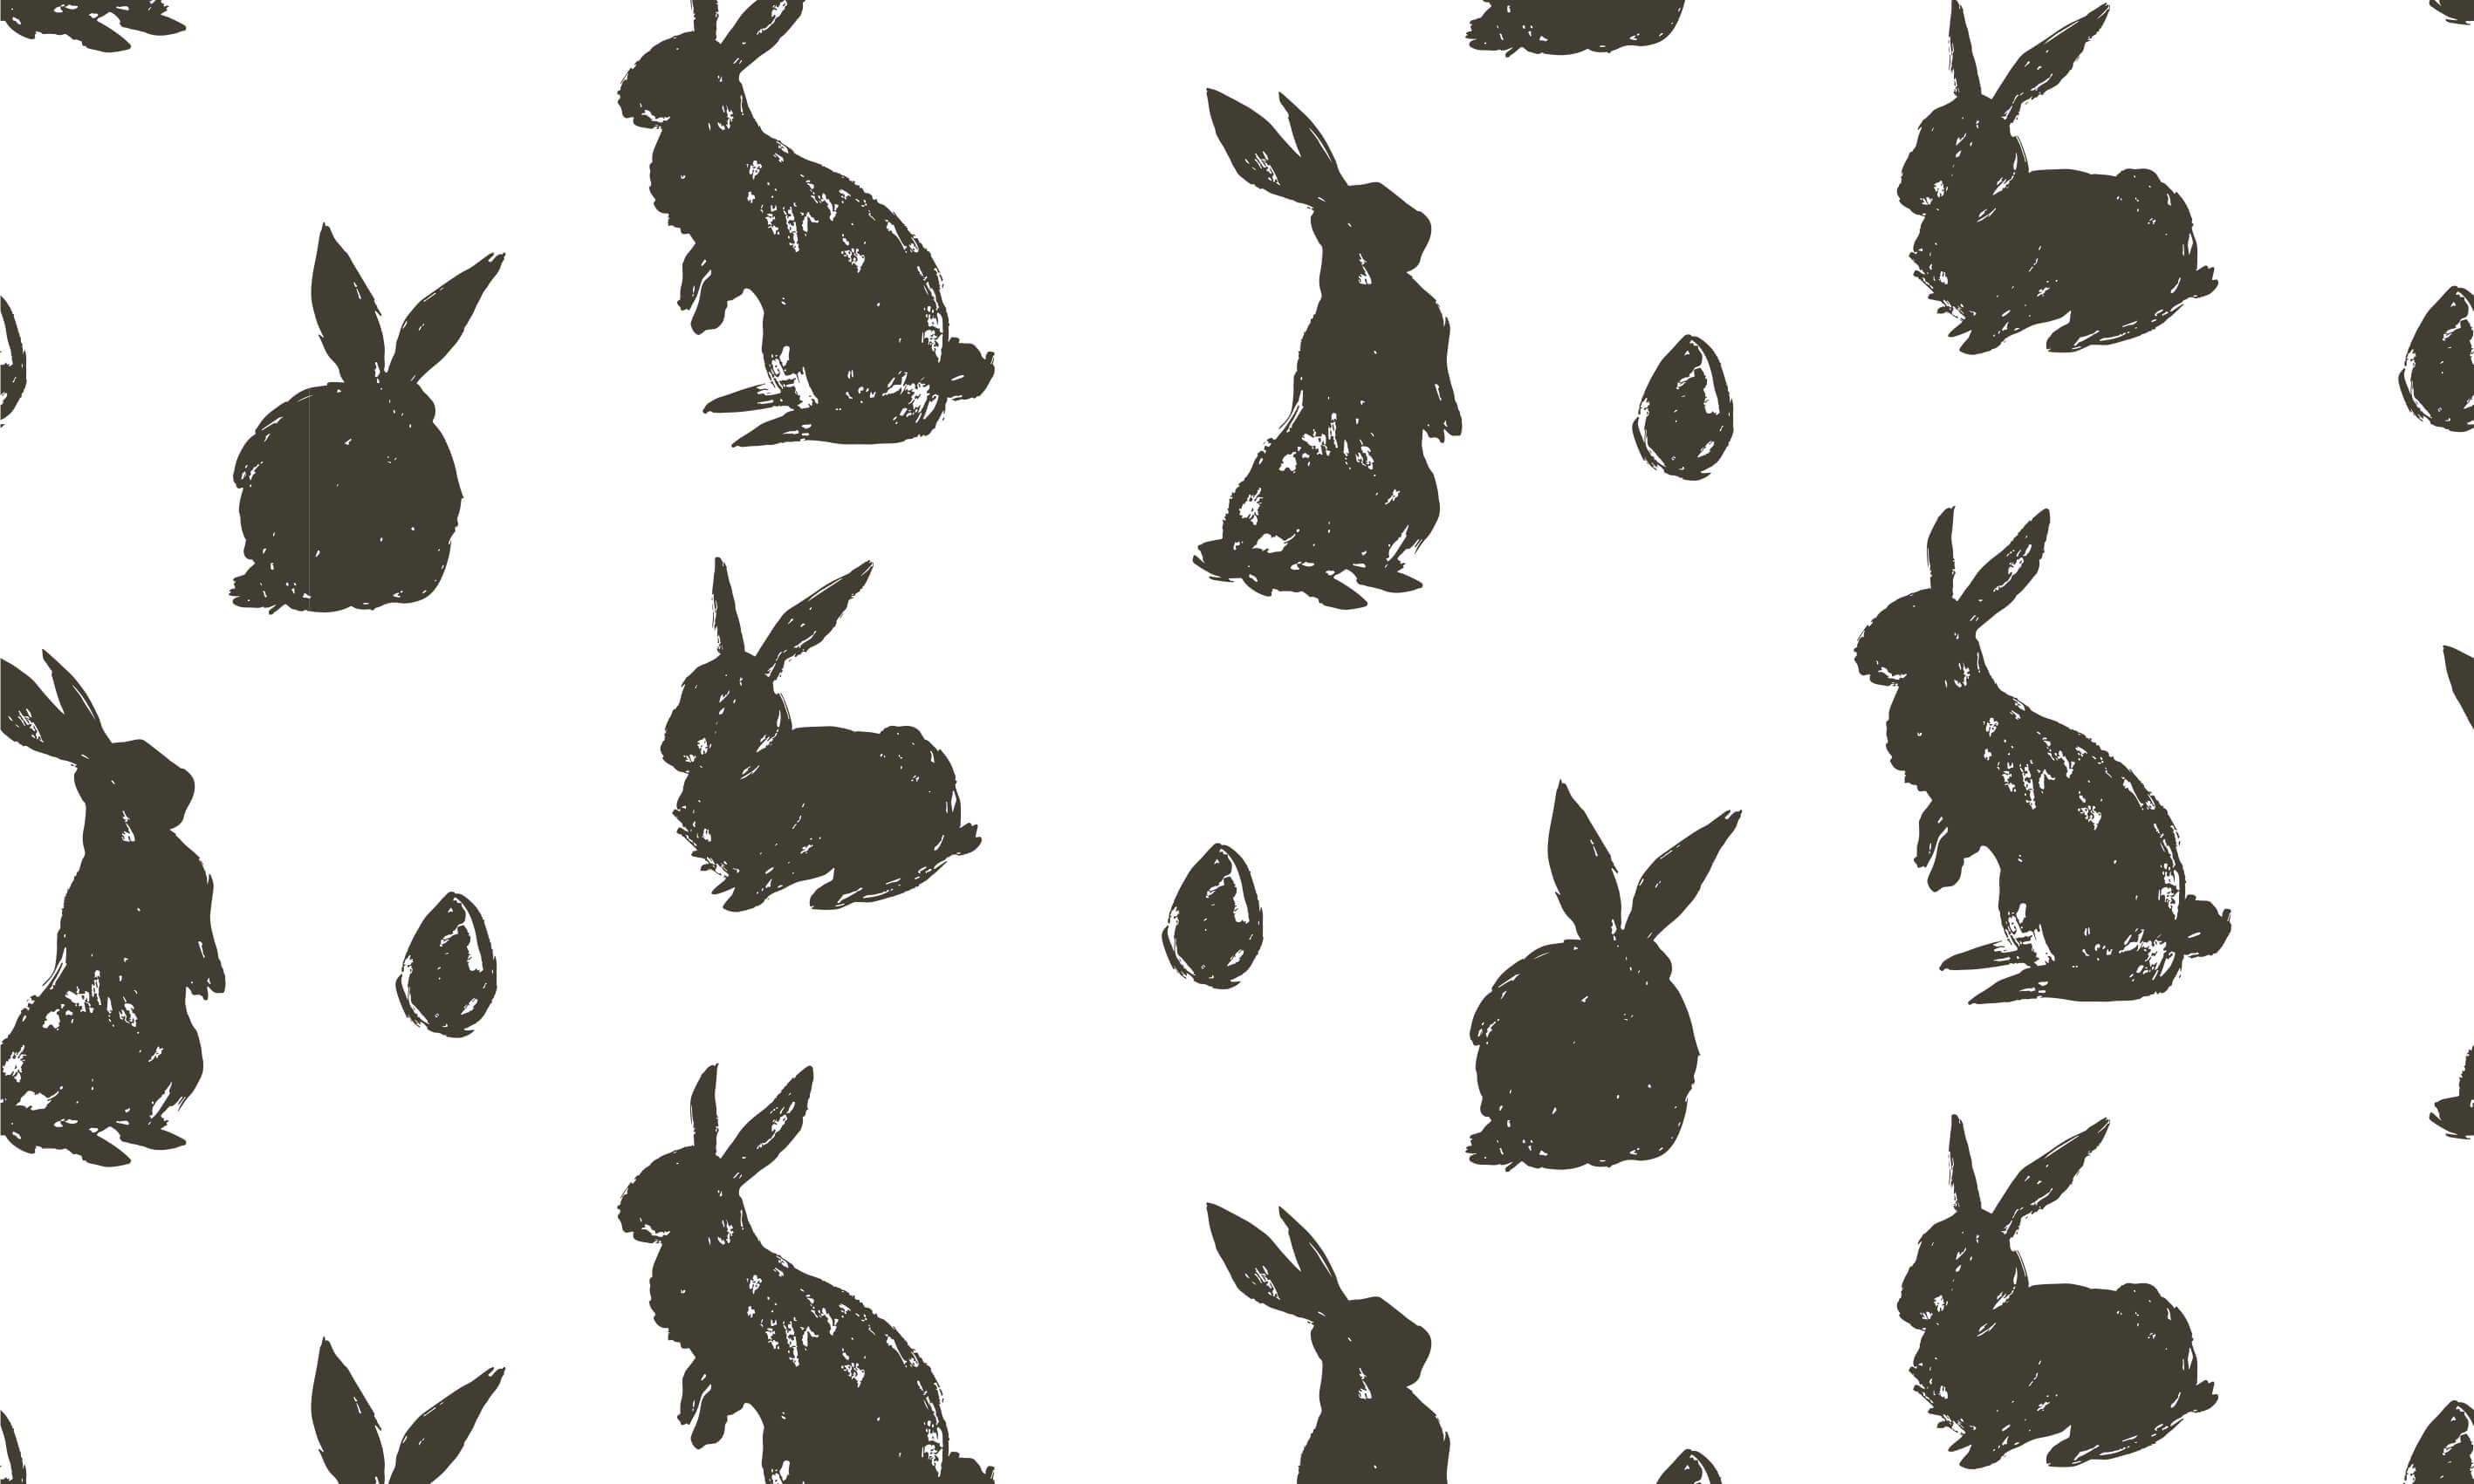 Pattern Easter Bunny